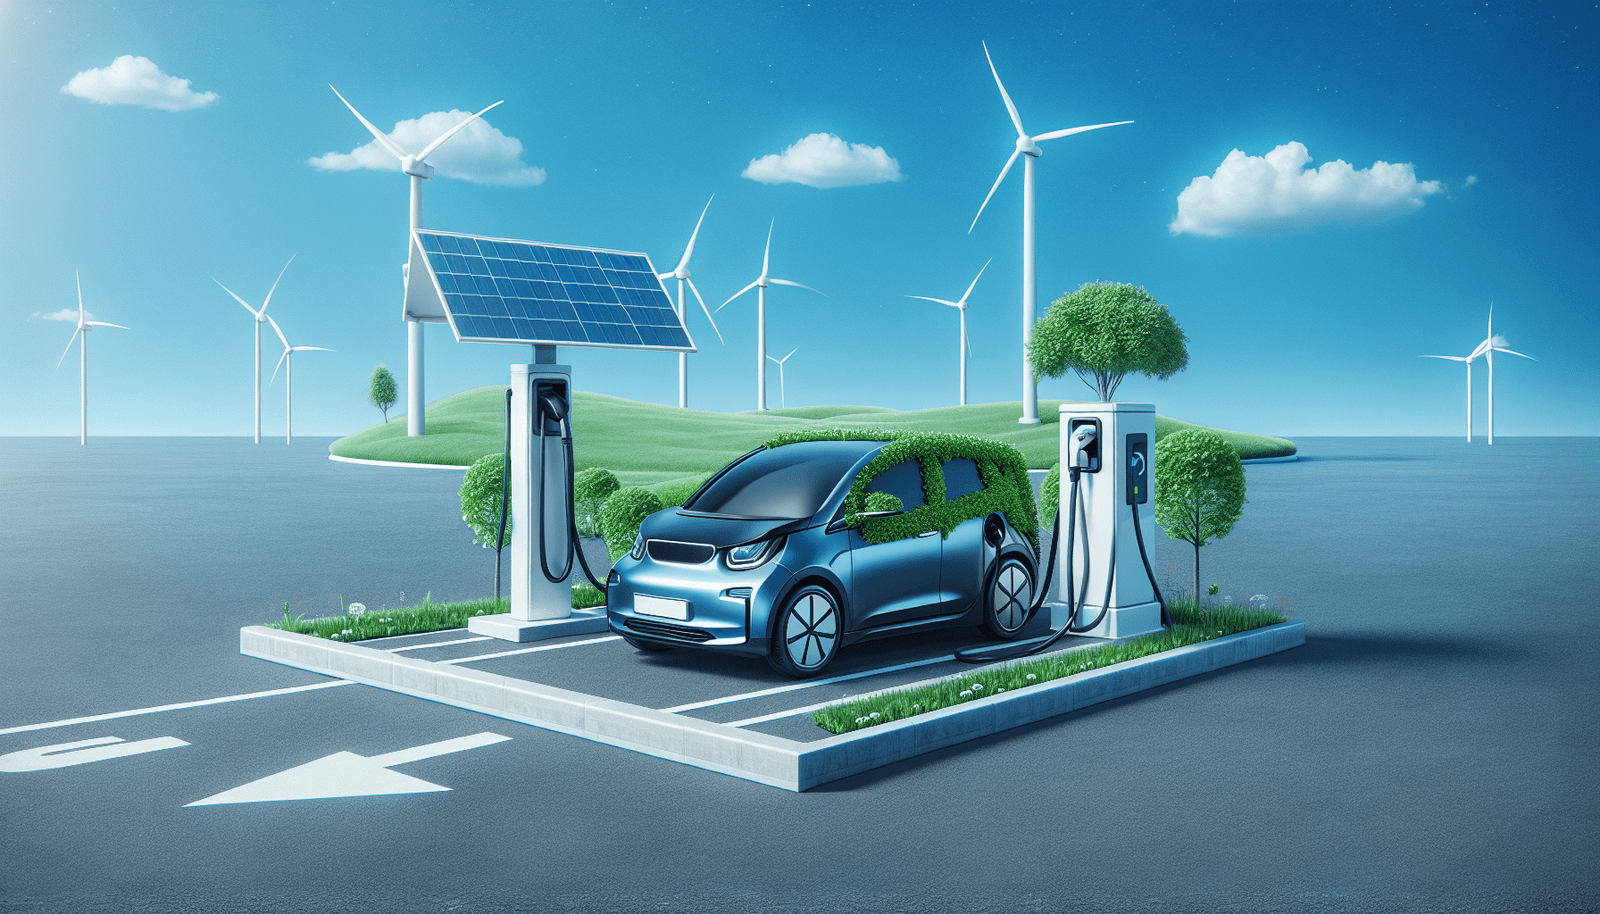 How Do Electric Vehicle Owners Benefit From Government Incentives And Rebates?